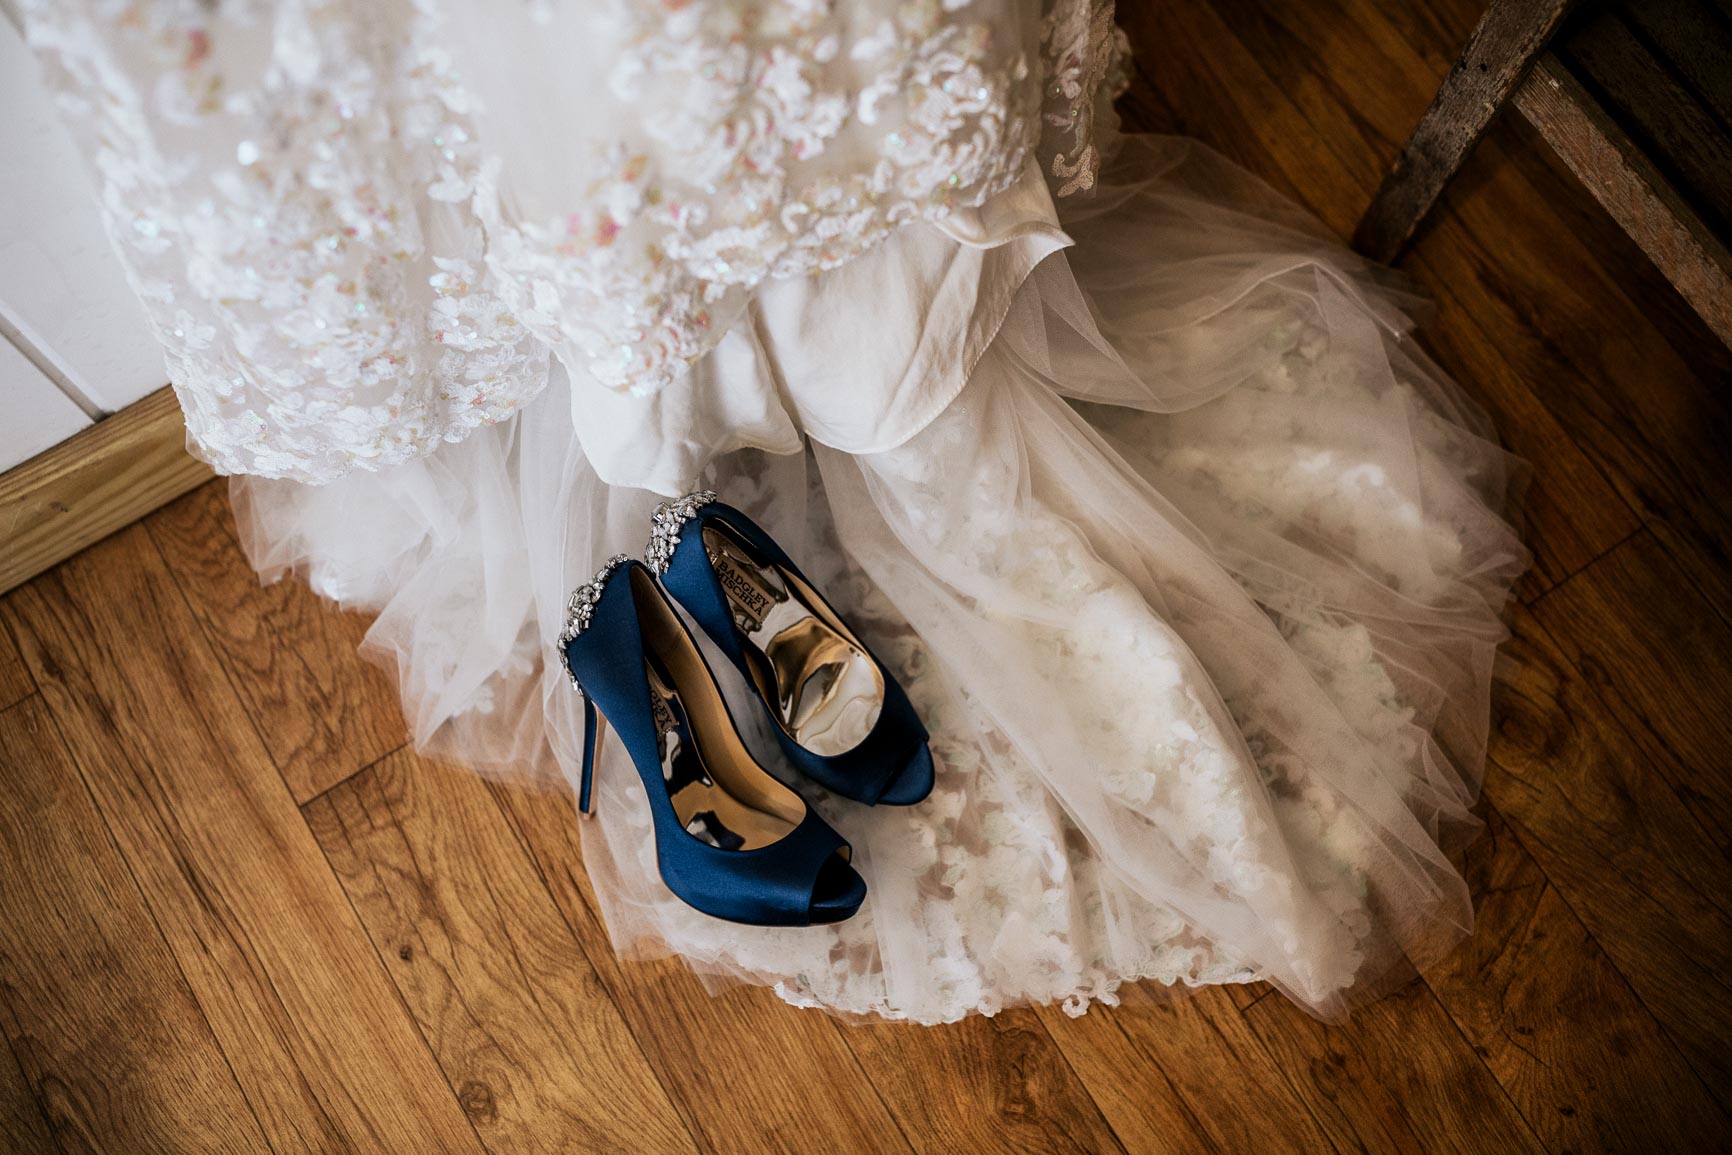 wedding dress and shoes, badgely mischka wedding shoes, rustic wedding photos, the cotton gin wedding photography, charlotte wedding photographer, nc wedding photographer, rustic nc weddings, nhieu tang photography